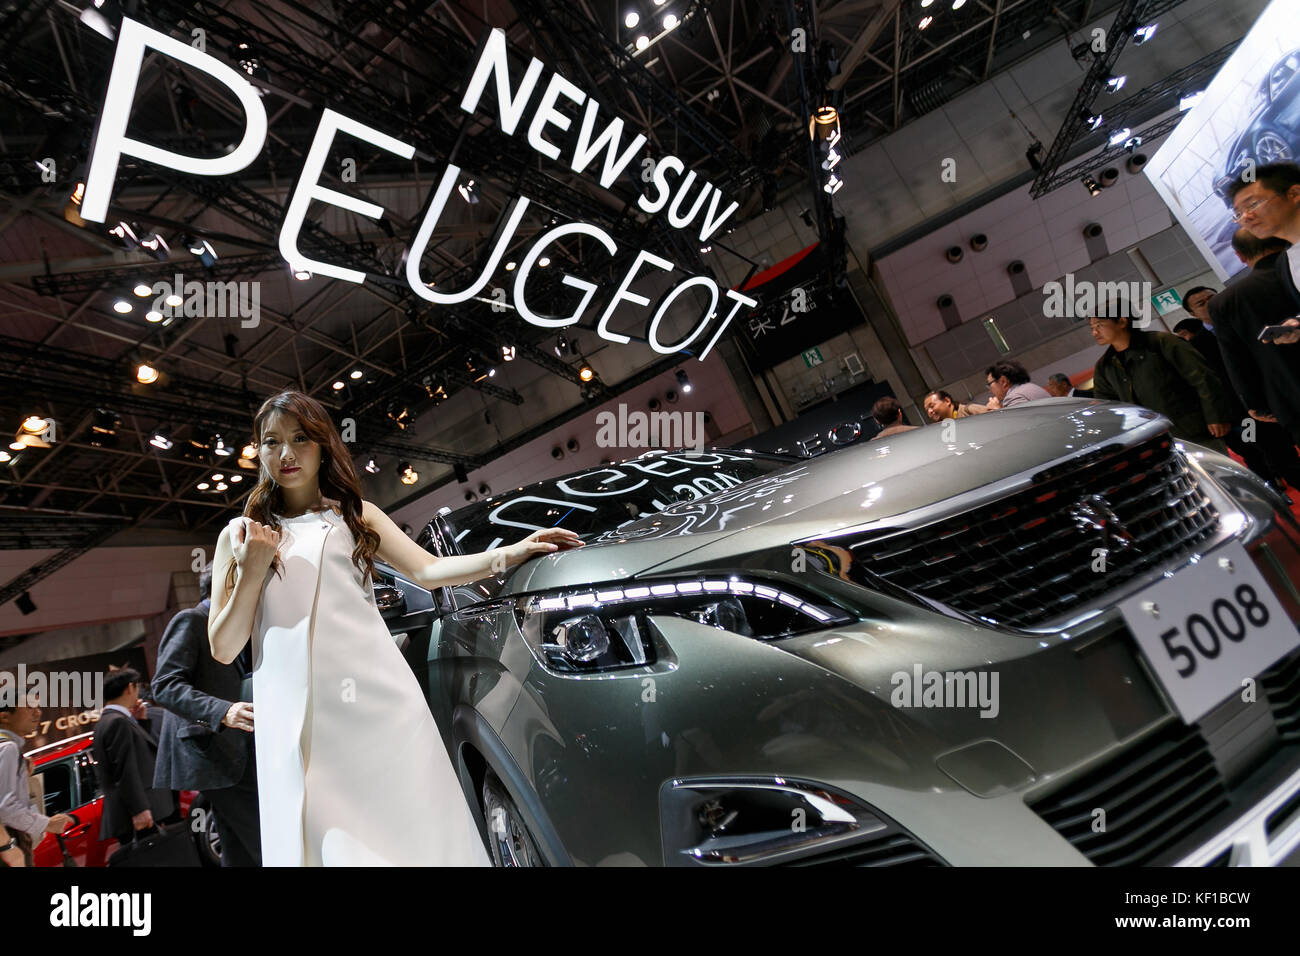 Tokyo, Japan. 25th Oct, 2017. A model poses for a photograph next to the new Peugeot 5008 SUV vehicle during the 45th Tokyo Motor Show 2017 in Tokyo Big Sight on October 25, 2017, Tokyo, Japan. Tokyo Motor Show 2017 will showcase new mobility solutions from over 153 Japanese and overseas automakers. The exhibition is open to the public from October 26 to November 5. Credit: Rodrigo Reyes Marin/AFLO/Alamy Live News Stock Photo